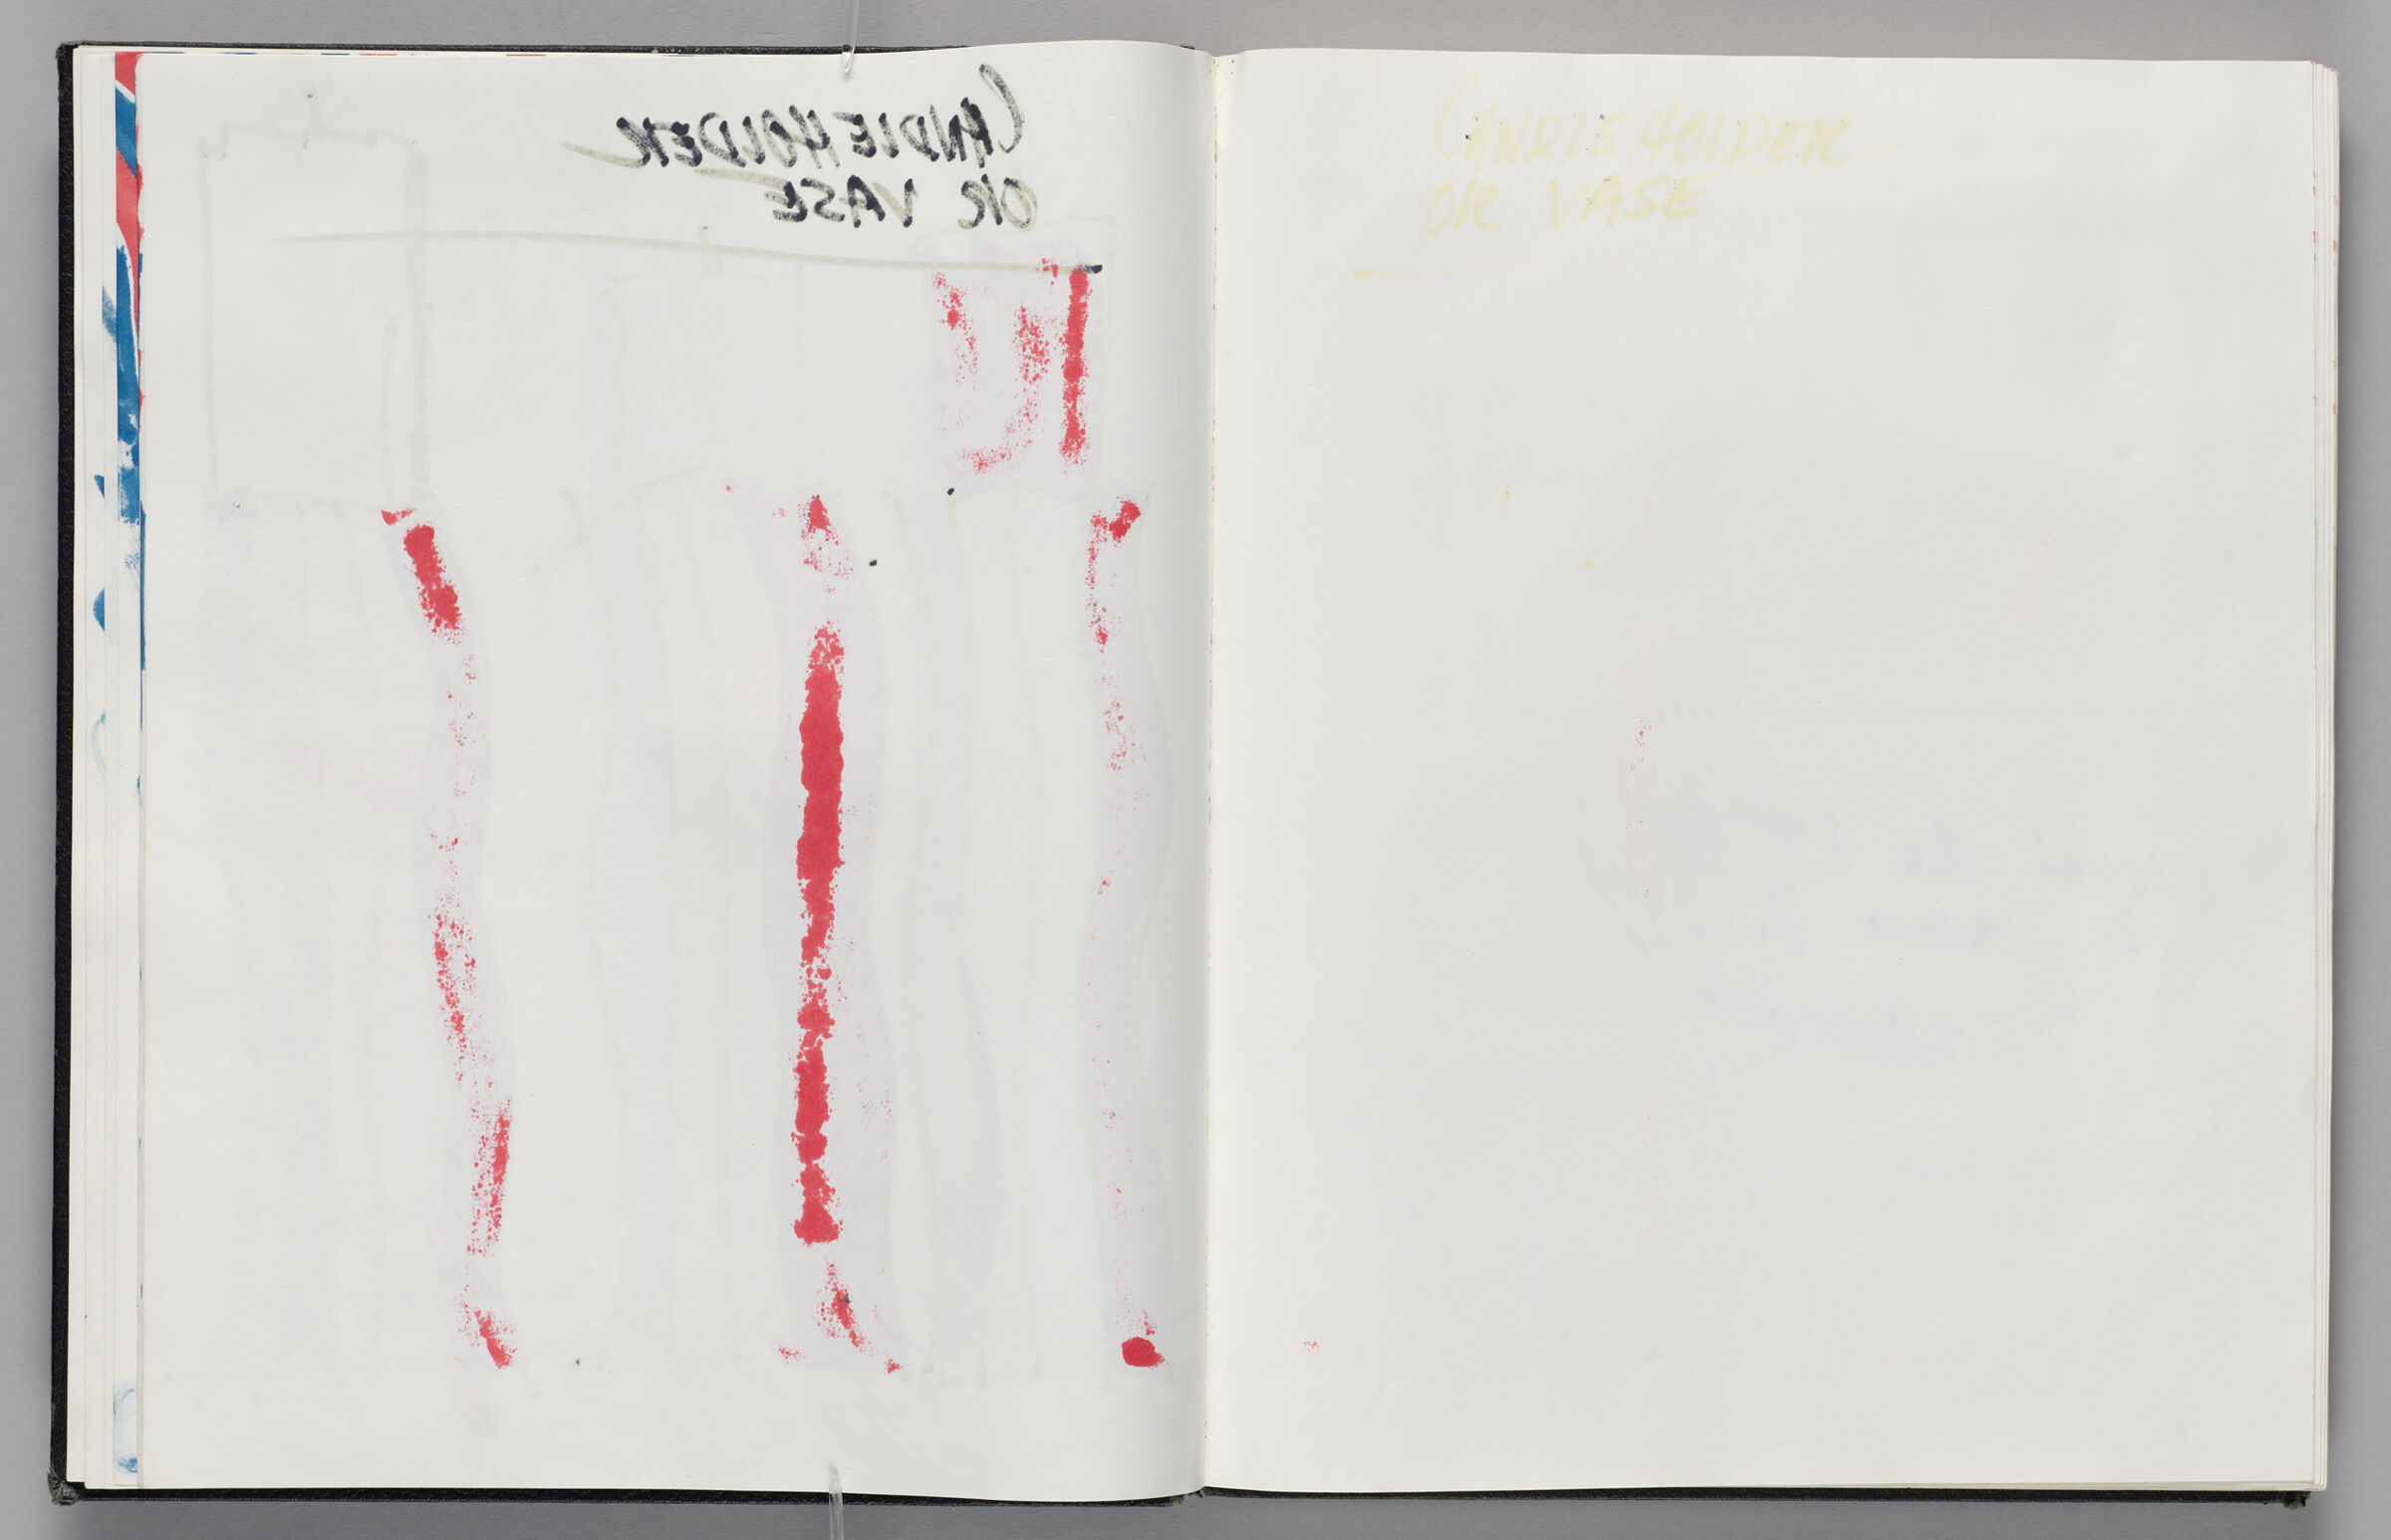 Untitled (Bleed-Through Of Previous Pages, Left Page); Untitled (Color Transfer, Right Page)